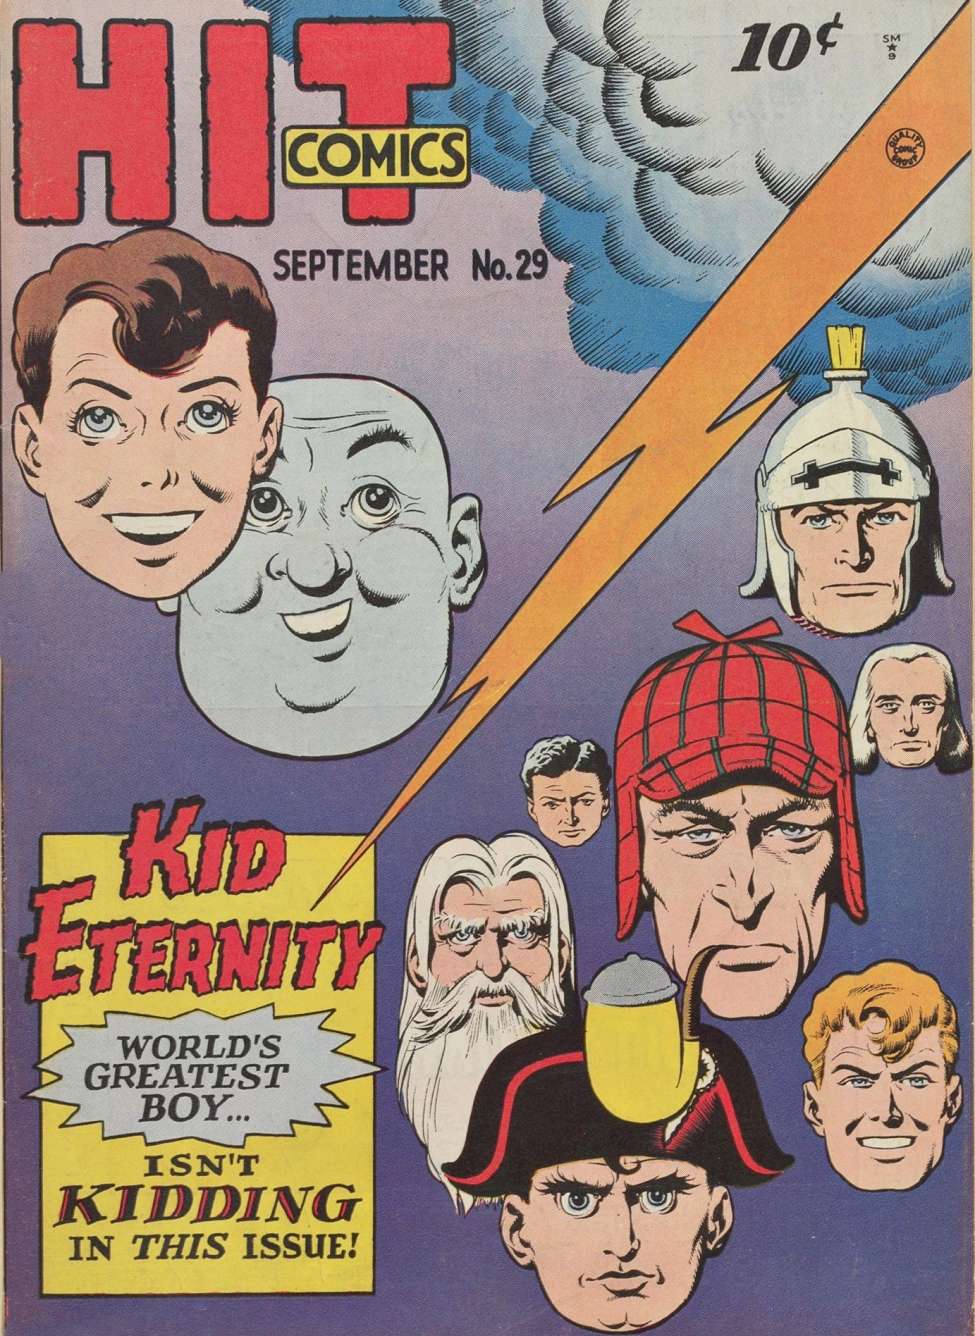 Book Cover For Hit Comics 29